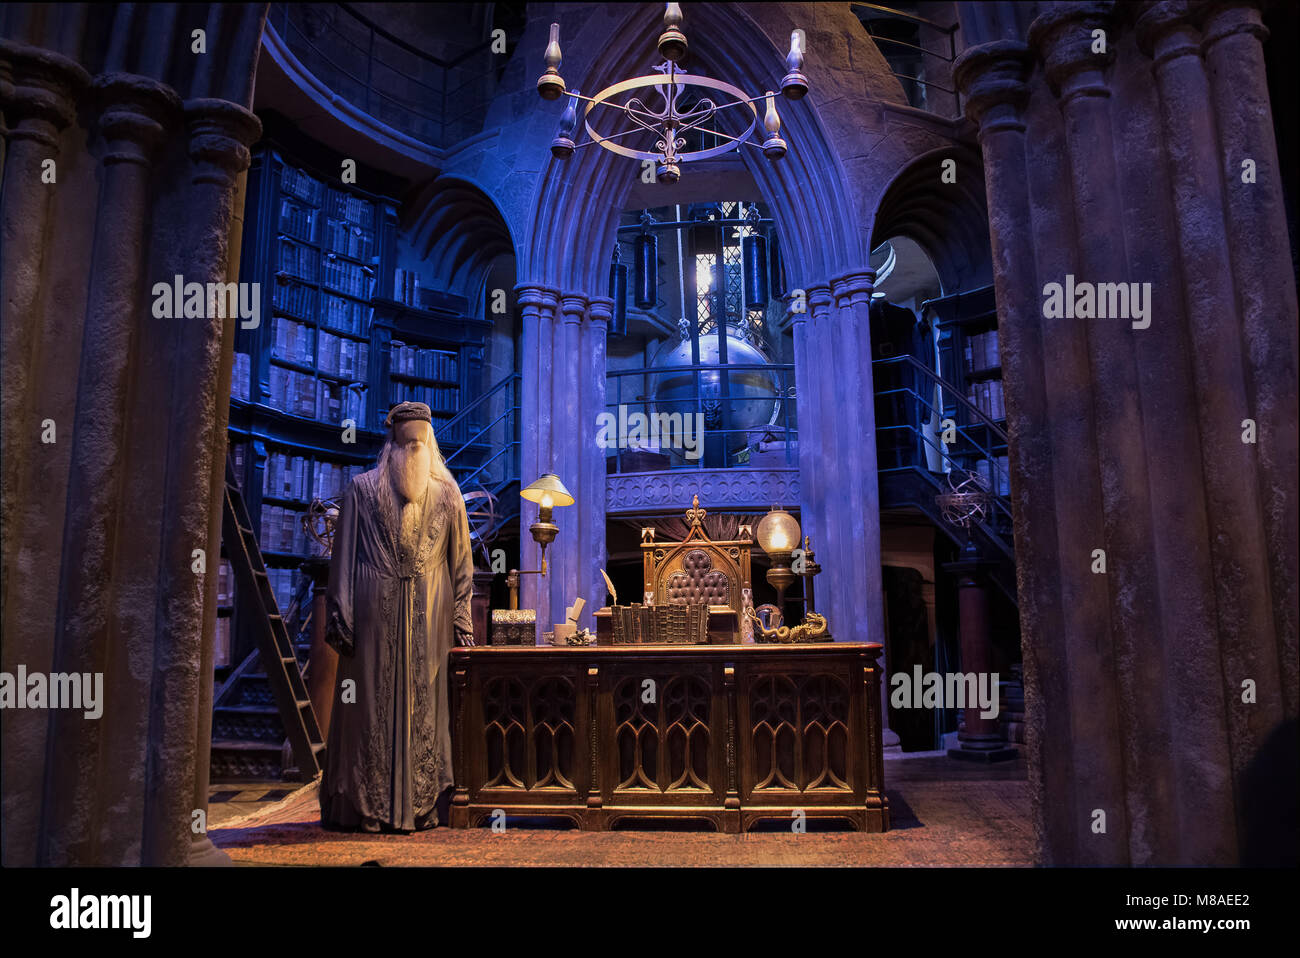 LEAVESDEN, UK - FEBRUARY 24TH 2018: Dumbledore's office display at the Making of Harry Potter tour at Warner Bros studio in Leavesden, UK Stock Photo